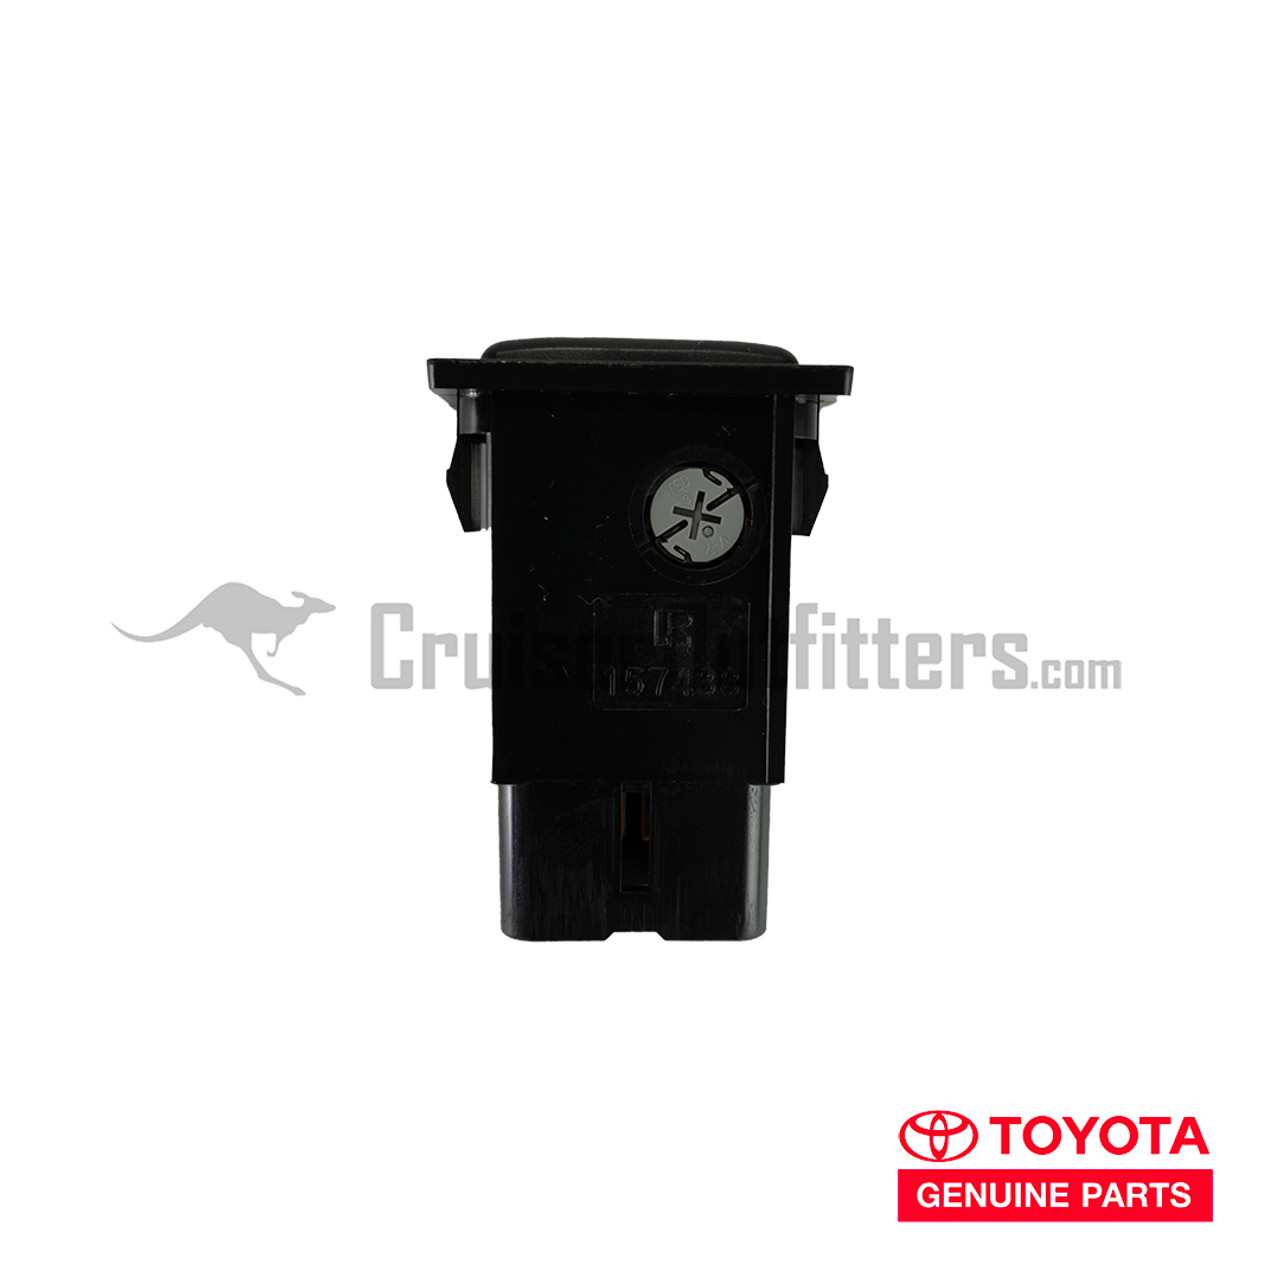 Center Differential Lock Switch - OEM Toyota - Fits 2/1995 - 1/1998 8x Series (ELEC60040)